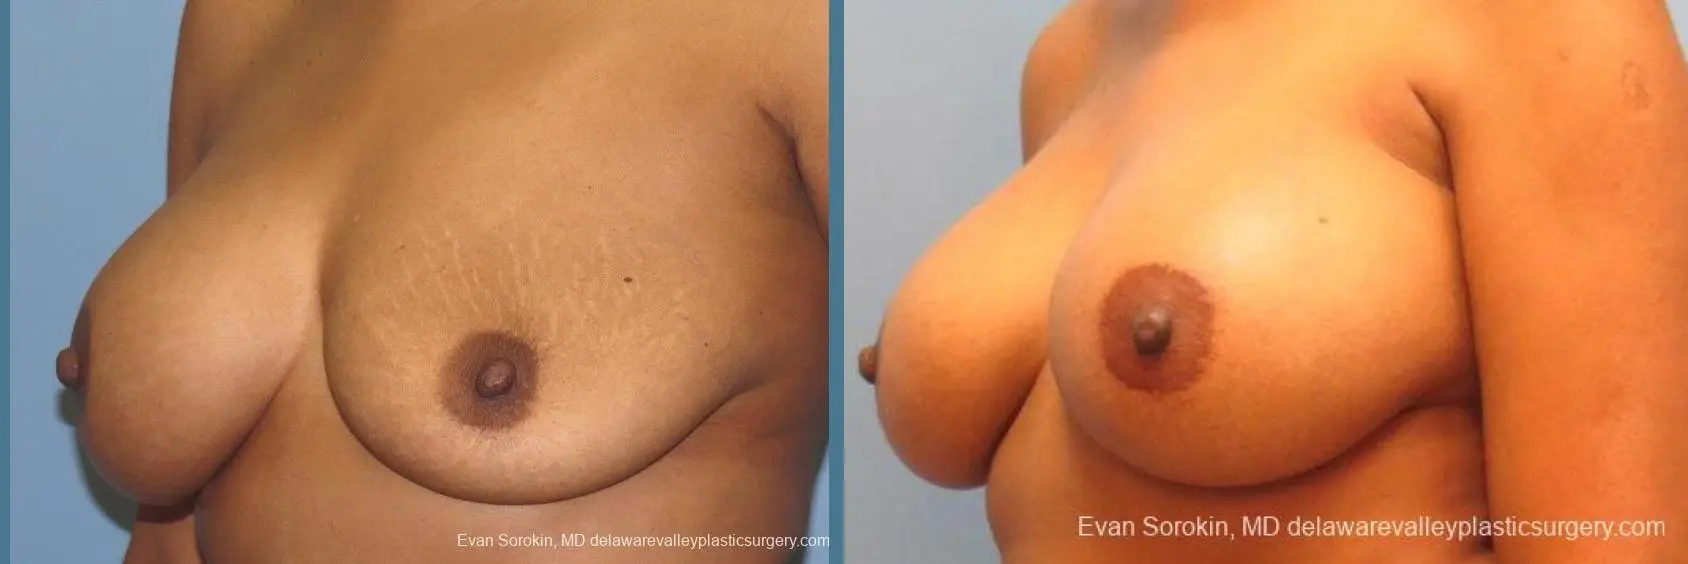 Philadelphia Breast Augmentation 10112 - Before and After 2